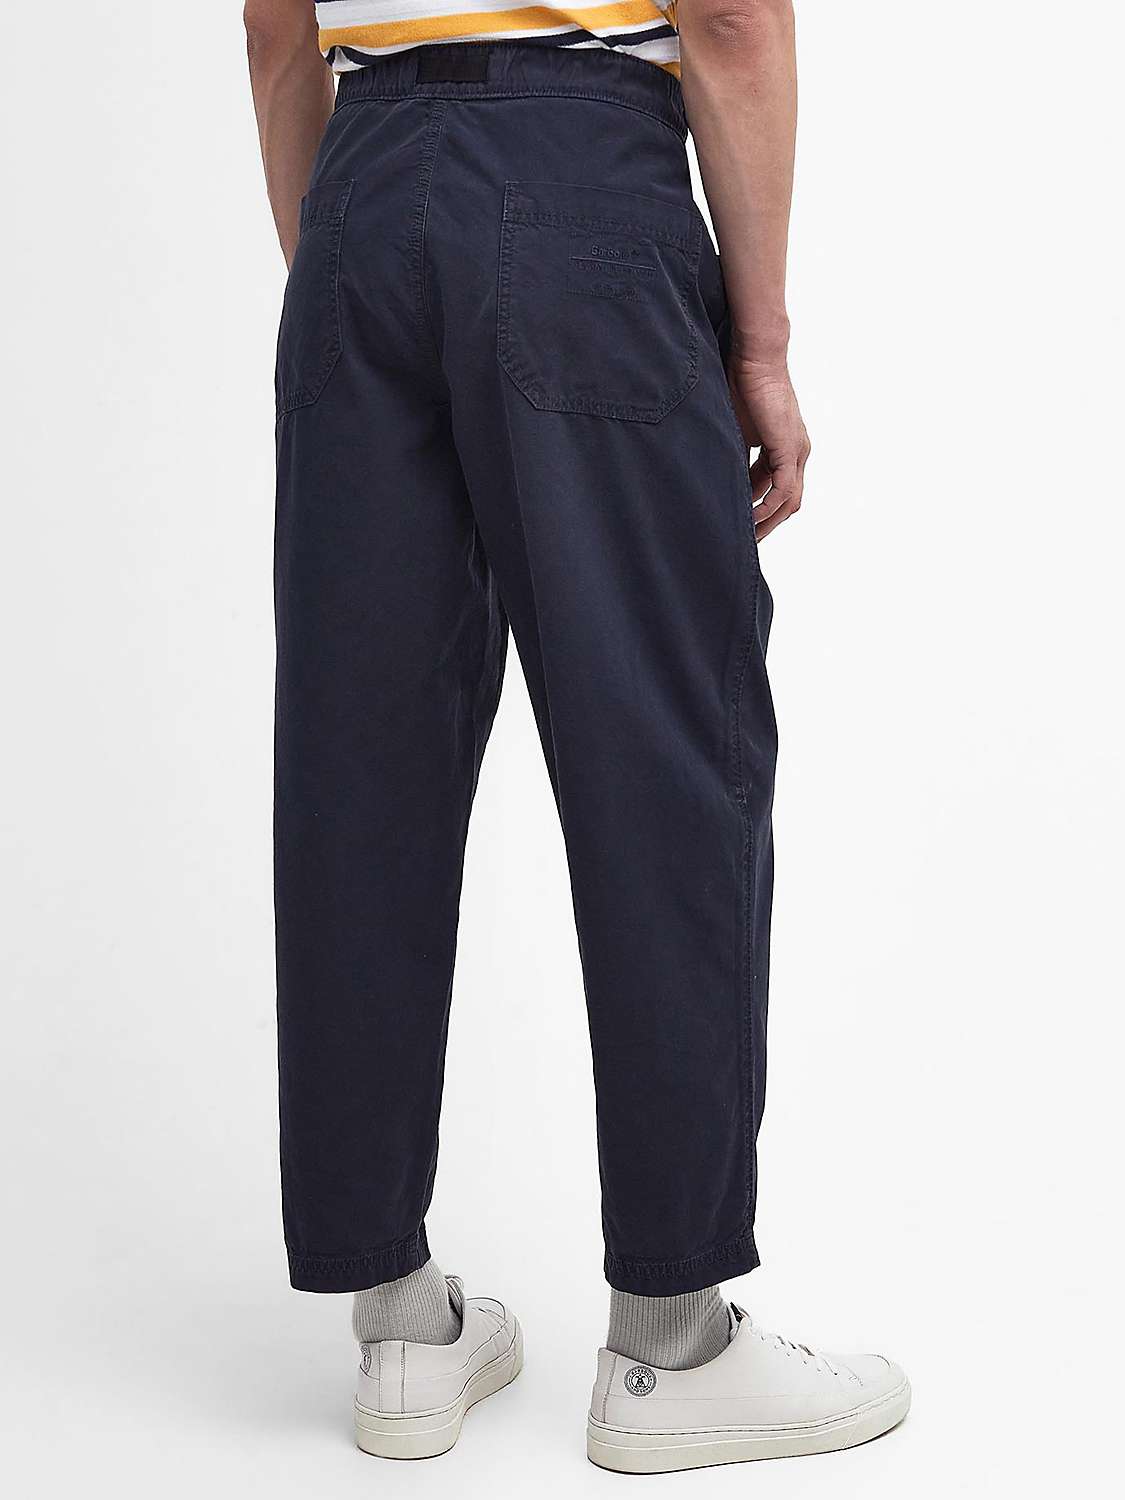 Buy Barbour Grindle Cotton Canvas Twill Straight Leg Trousers, Navy Online at johnlewis.com